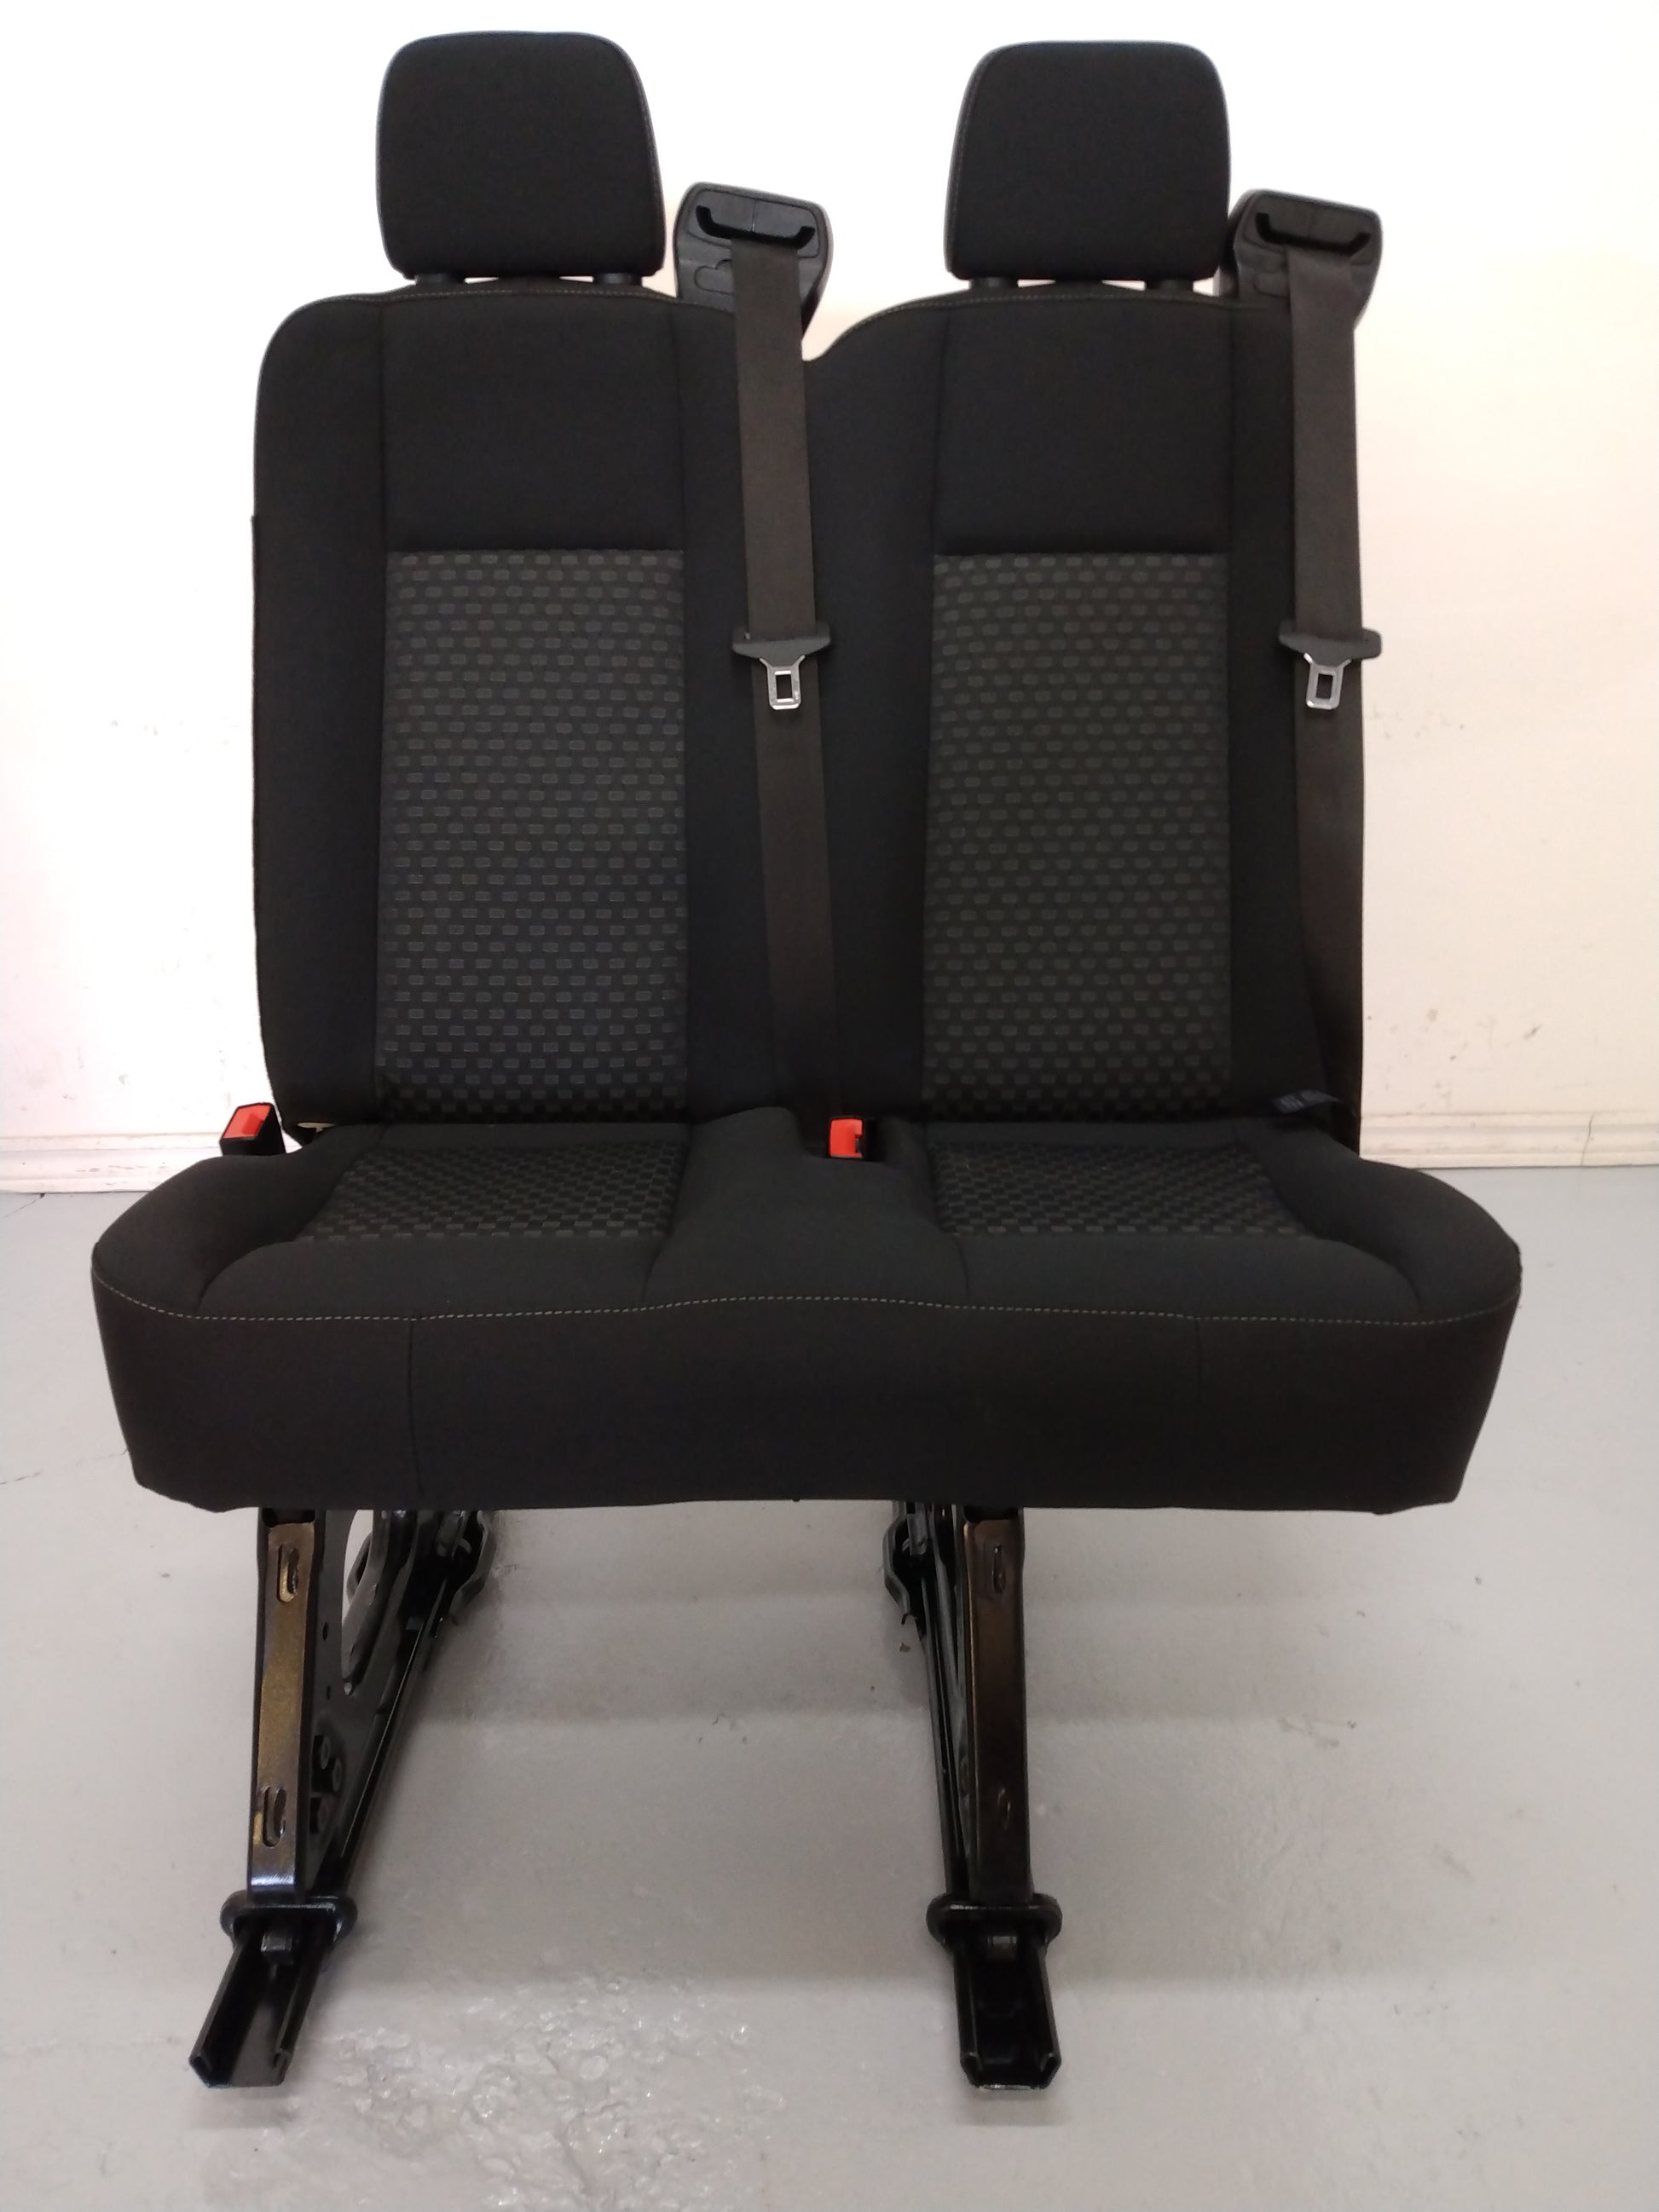 Black cloth 31" wide left side two position bench seat with integrated seatbelt new take out from 2020 Ford Transit vans. removable quick release universal fit perfect for custom install in camper cargo work van, promaster 